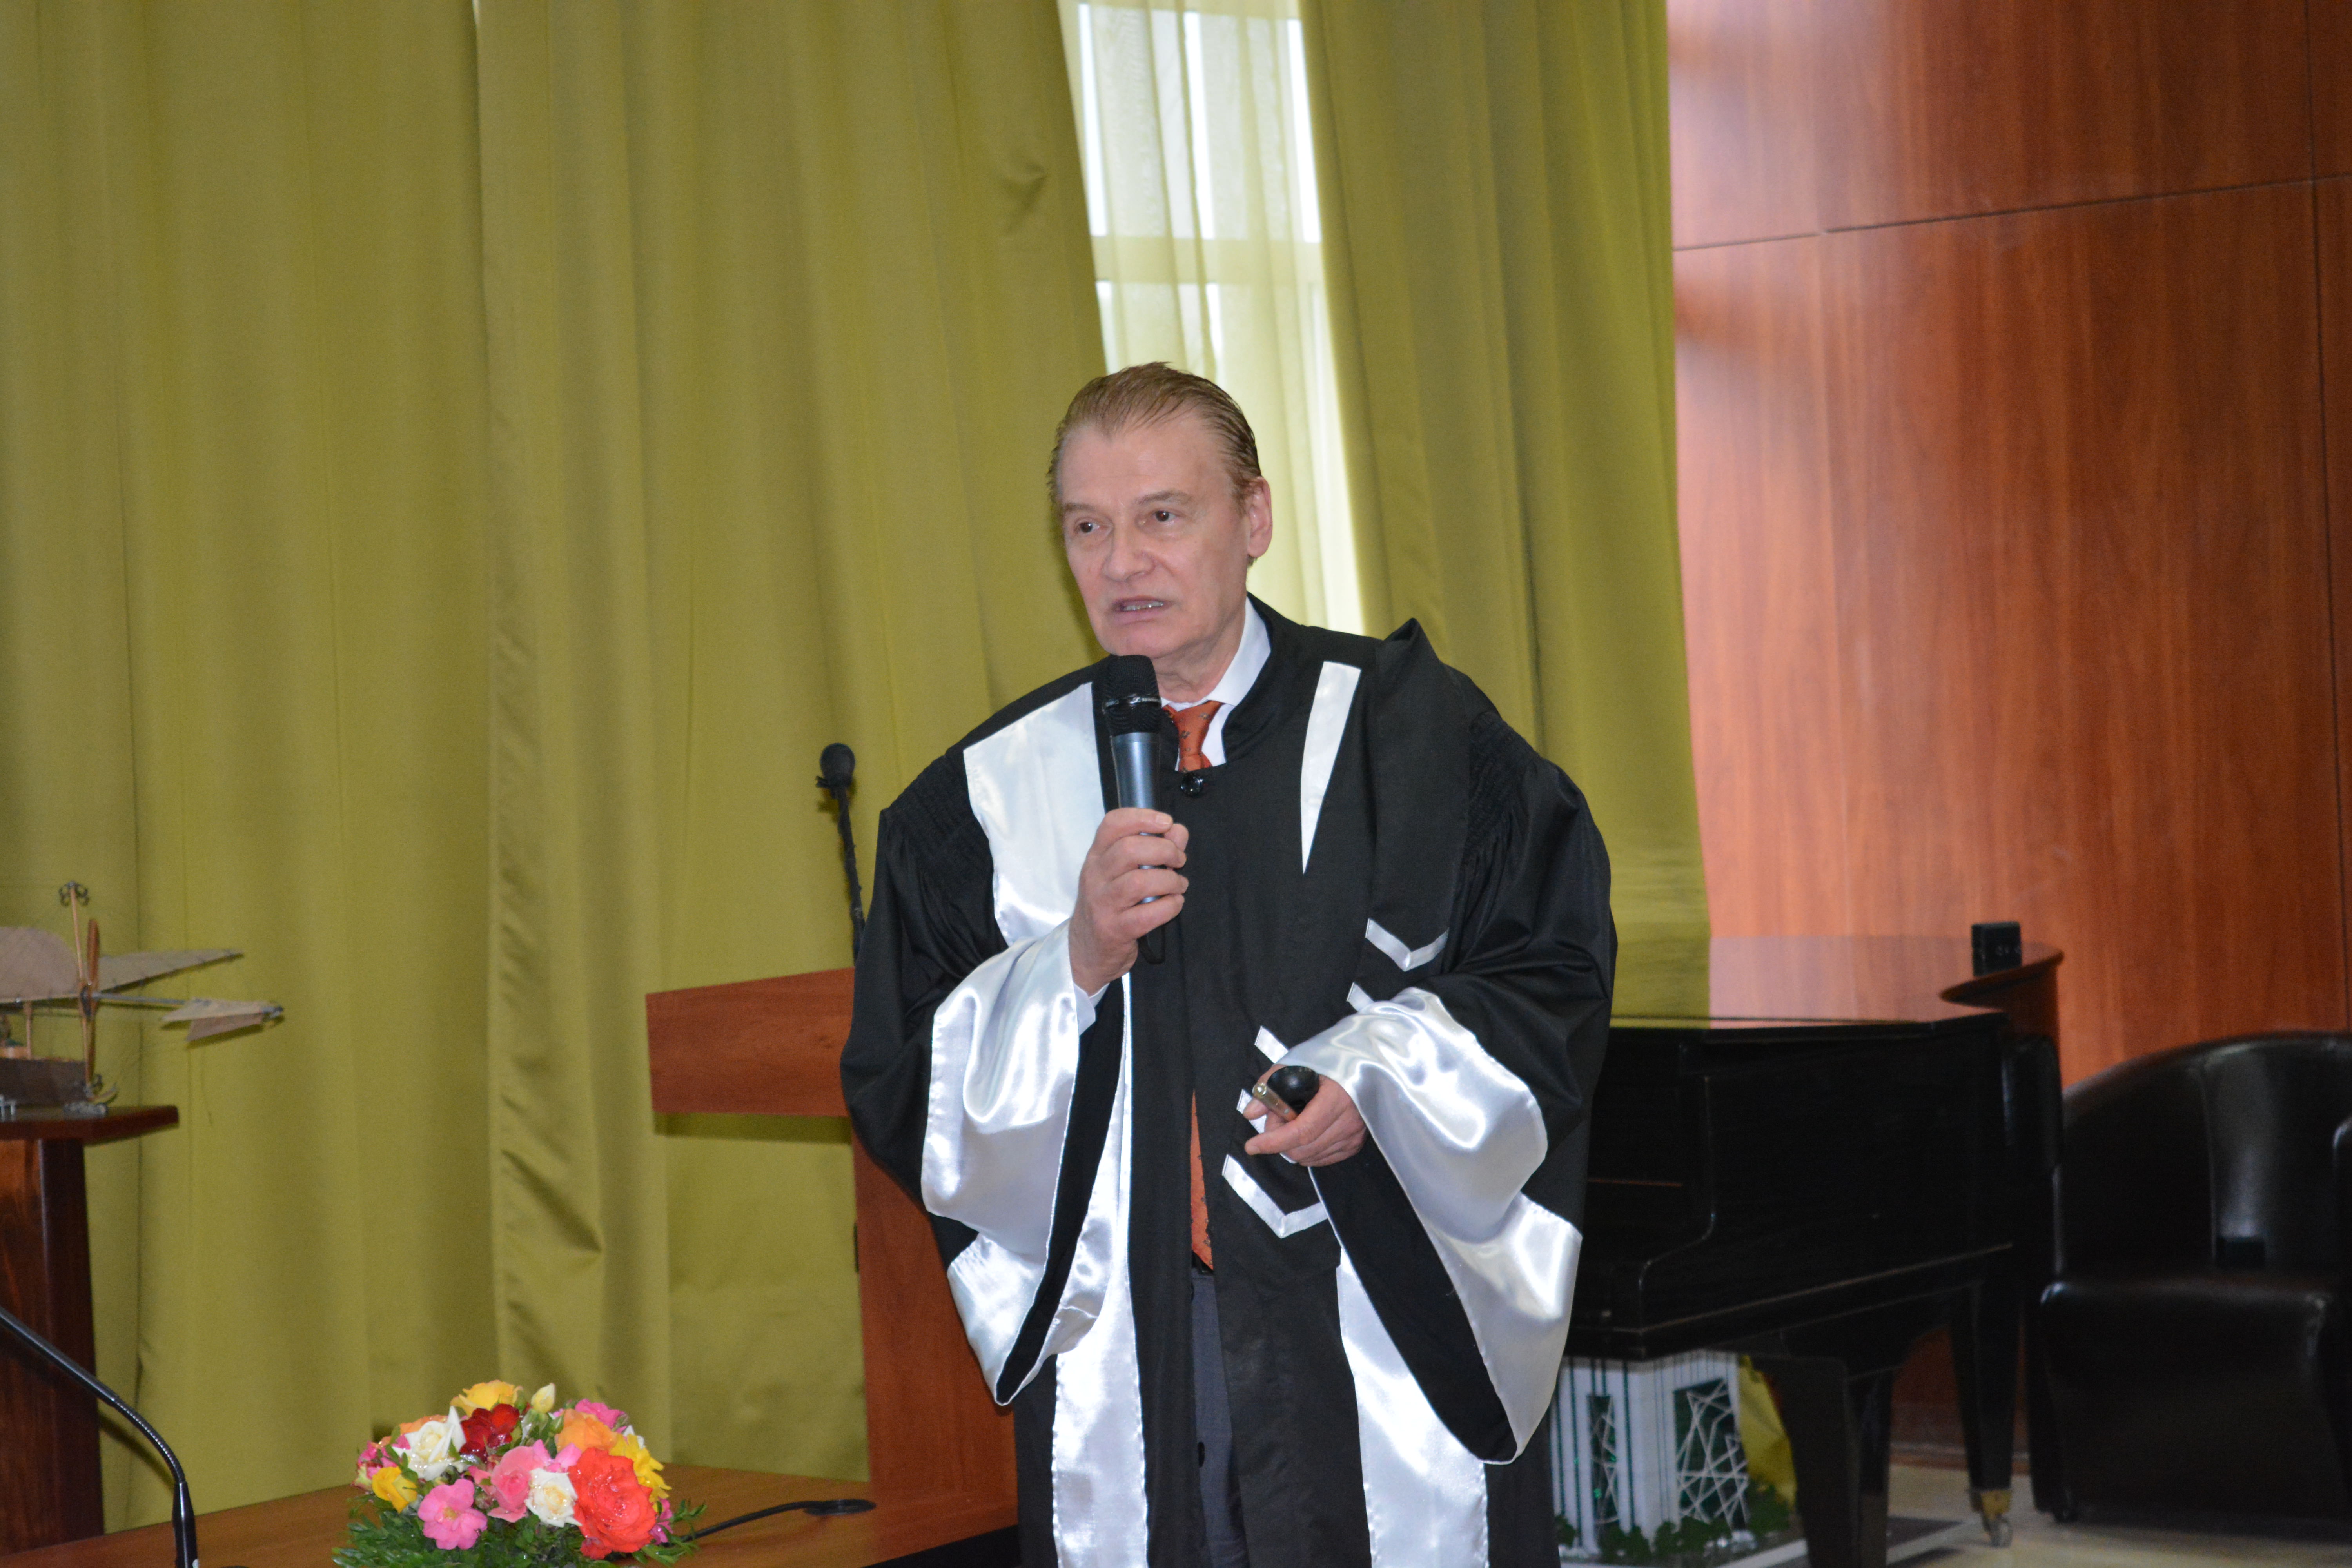 The ceremony of awarding the title of Doctor Honoris Causa of the University POLITEHNICA of Bucharest, to Mr. Virgil PERCEC